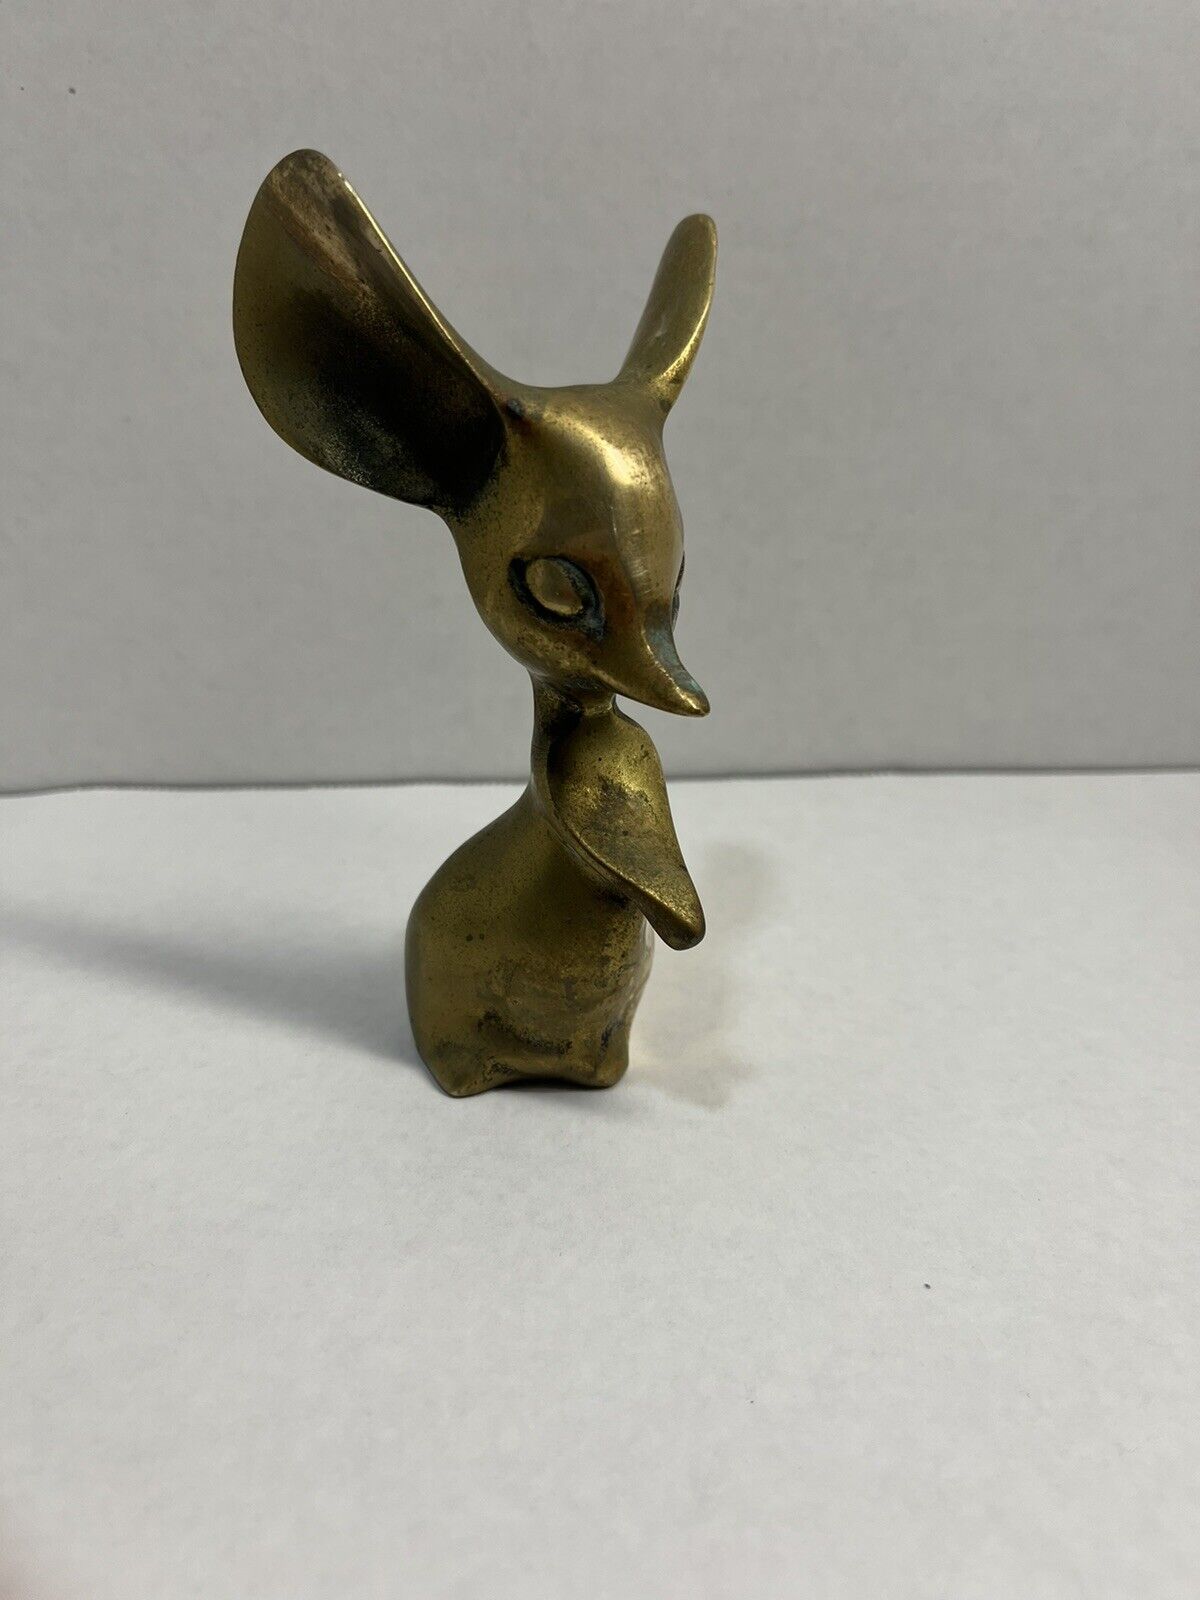 Vintage Leonard Solid Brass Mouse With Cute Big Ears Made In KOREA